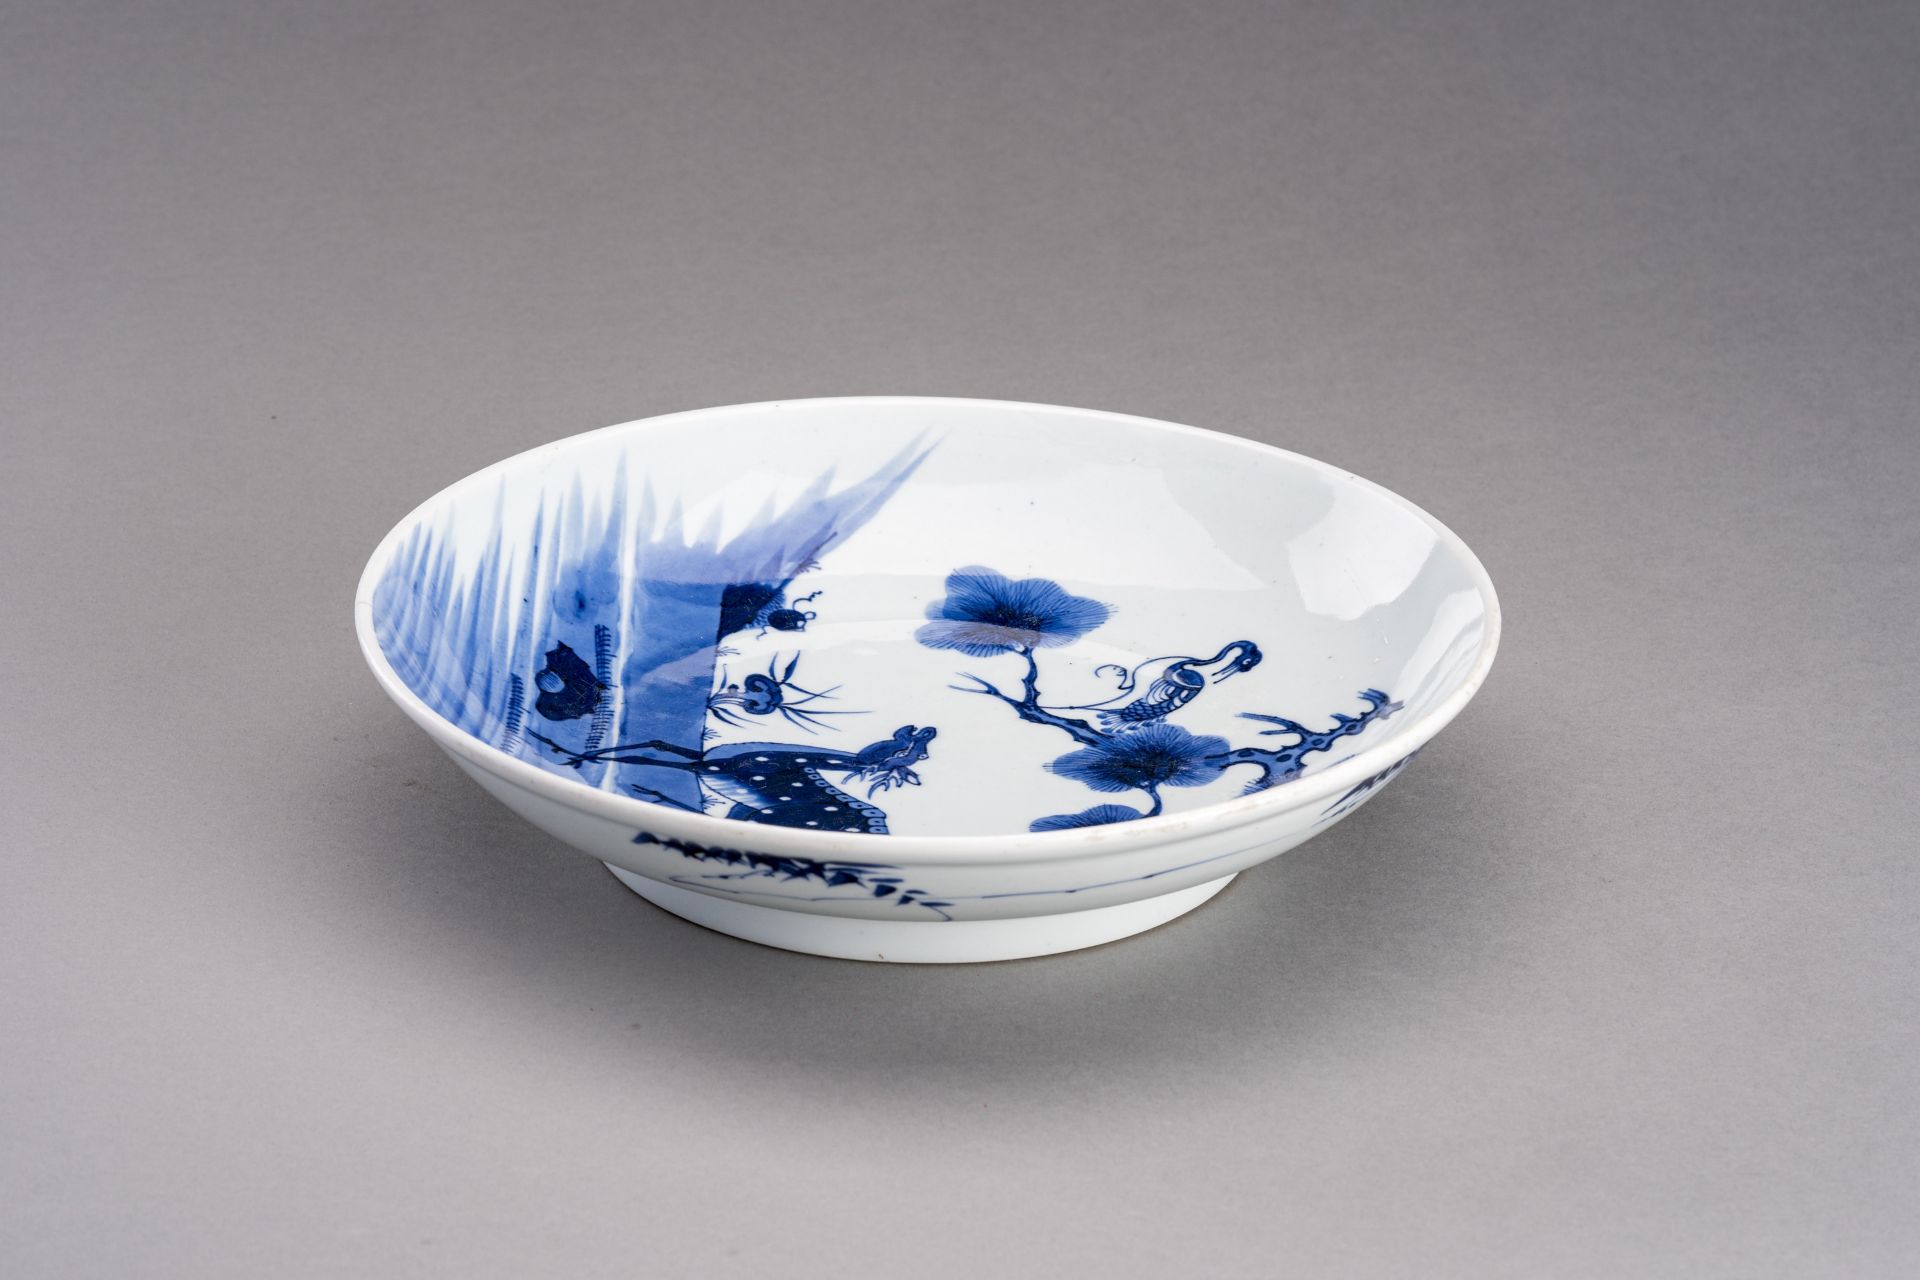 A BLUE AND WHITE 'DEER AND CRANE' PORCELAIN DISH, QING DYNASTY - Image 2 of 7